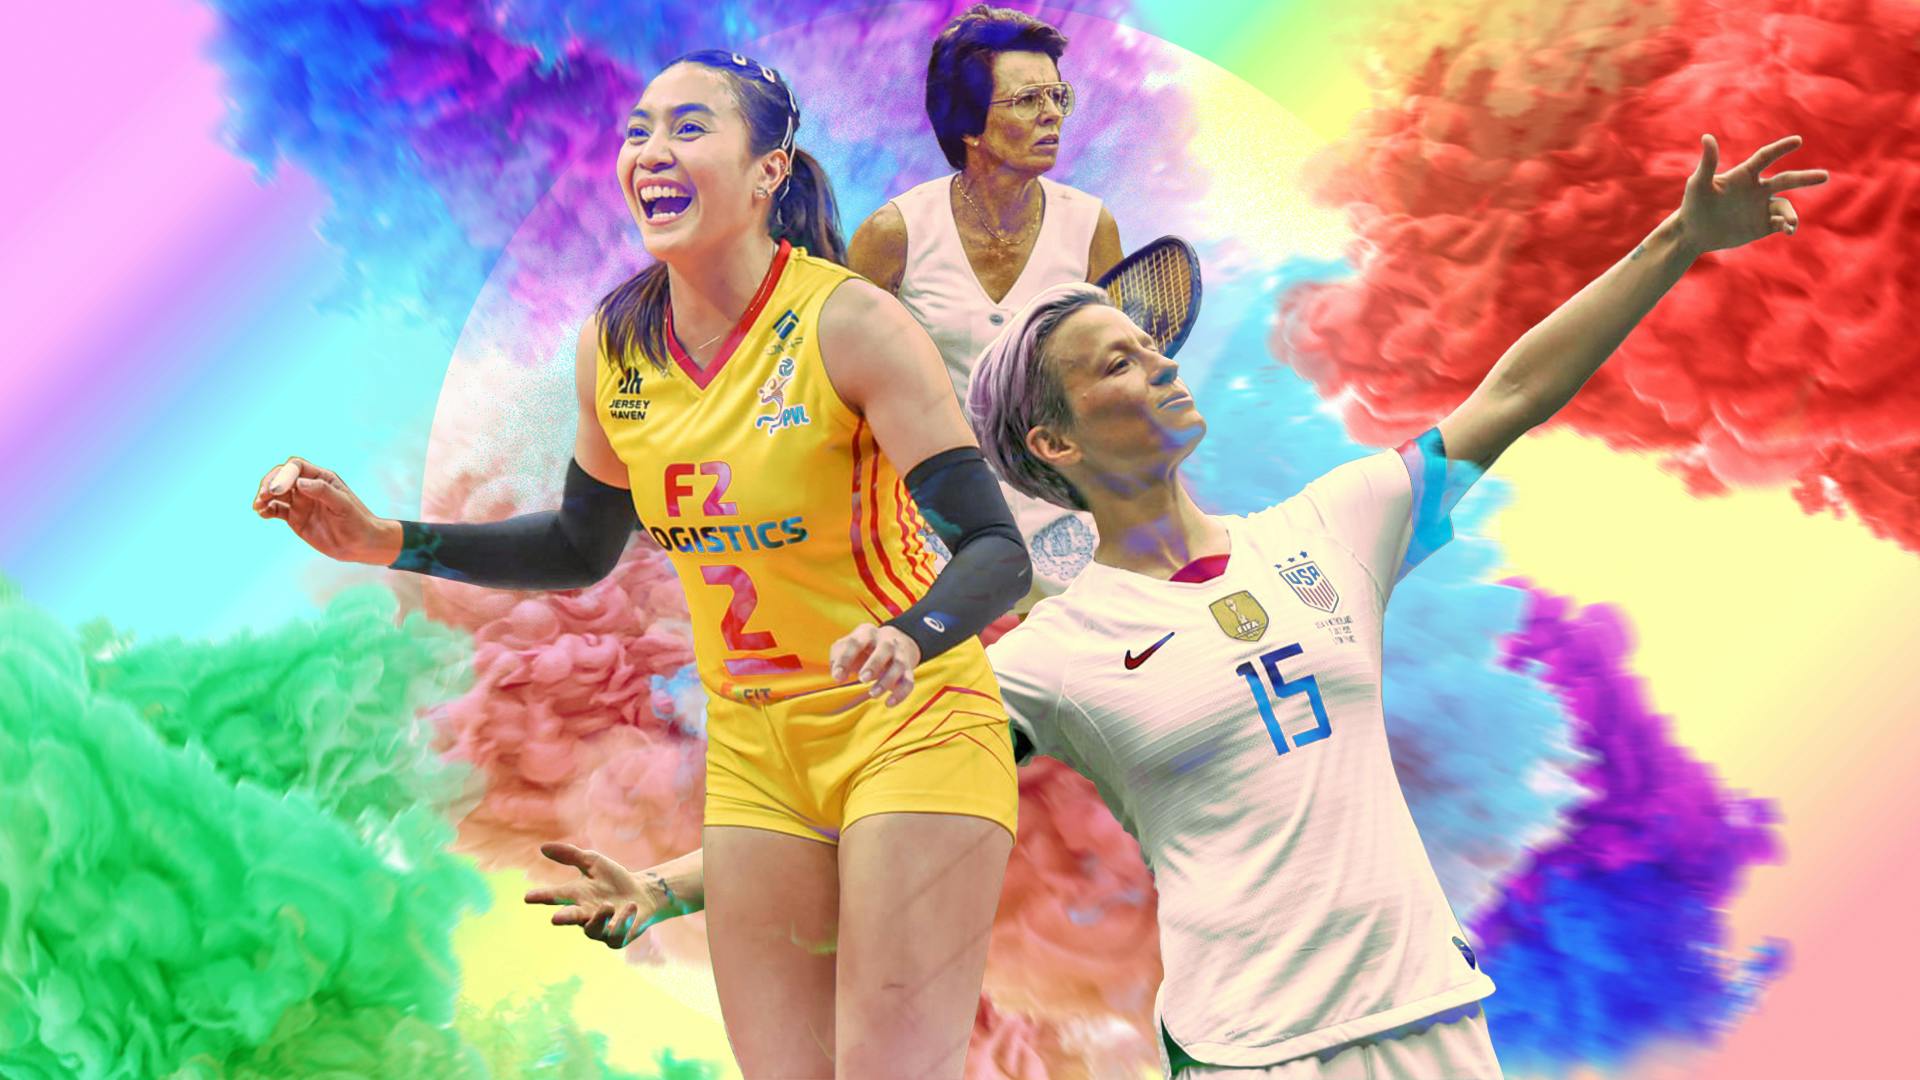 Female athletes who embodied pride in skill, passion, and love